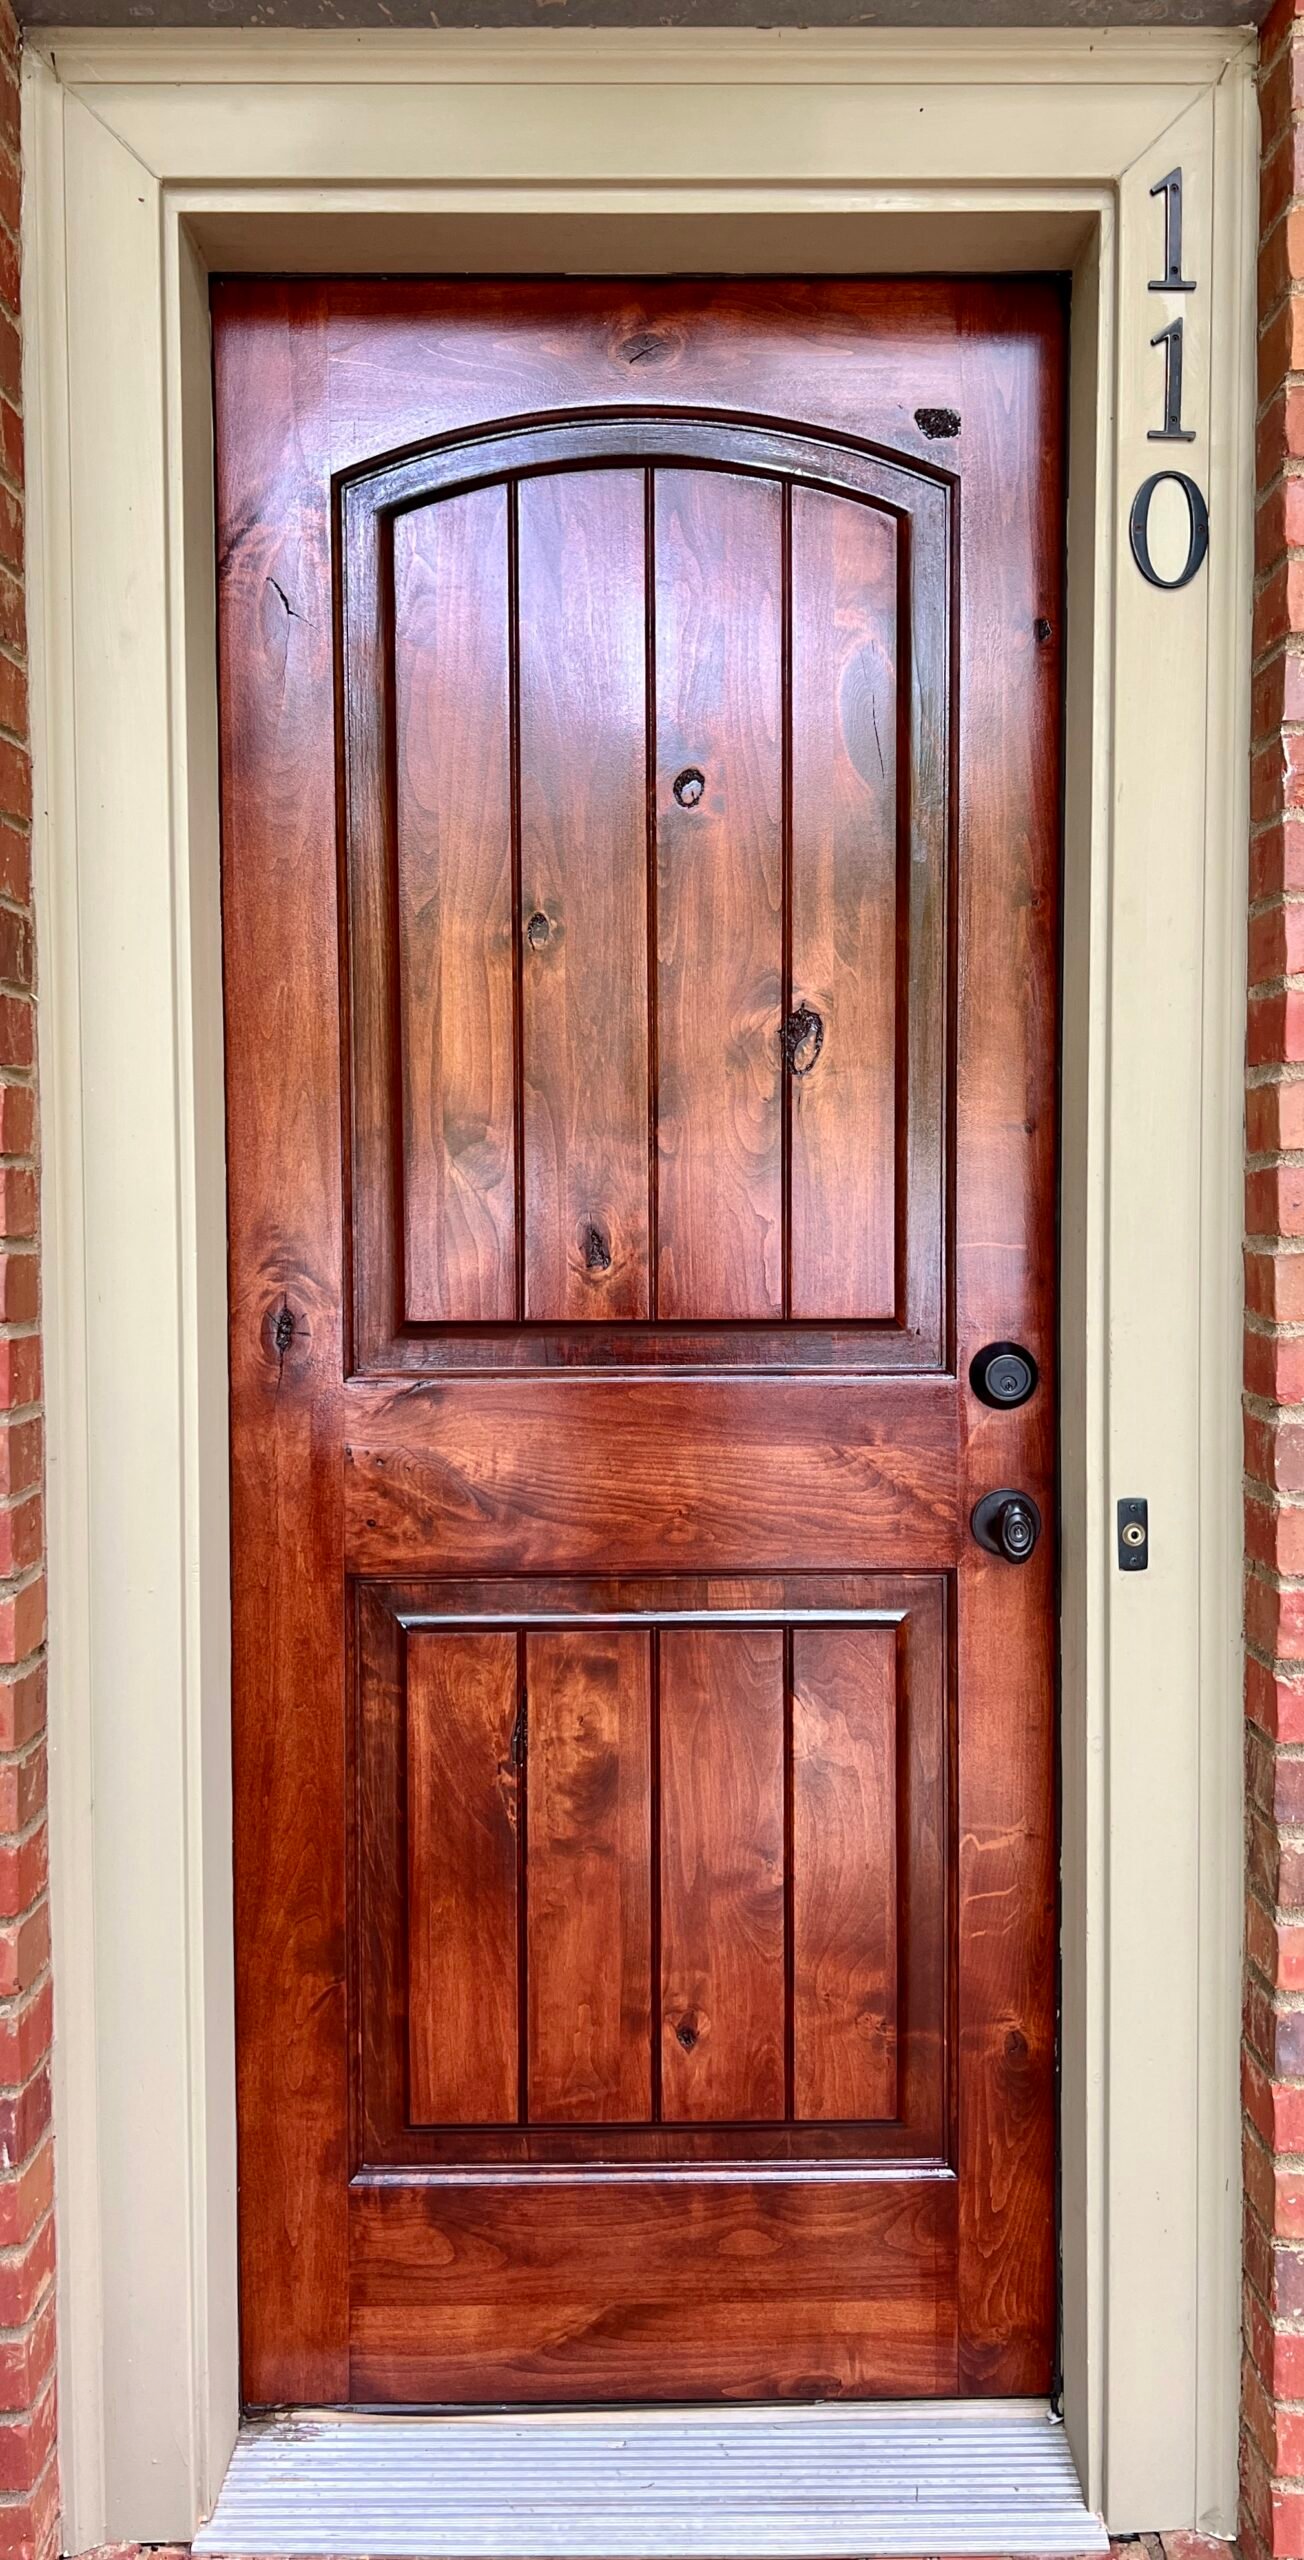 Newly restored wooden door with a pristine, polished finish